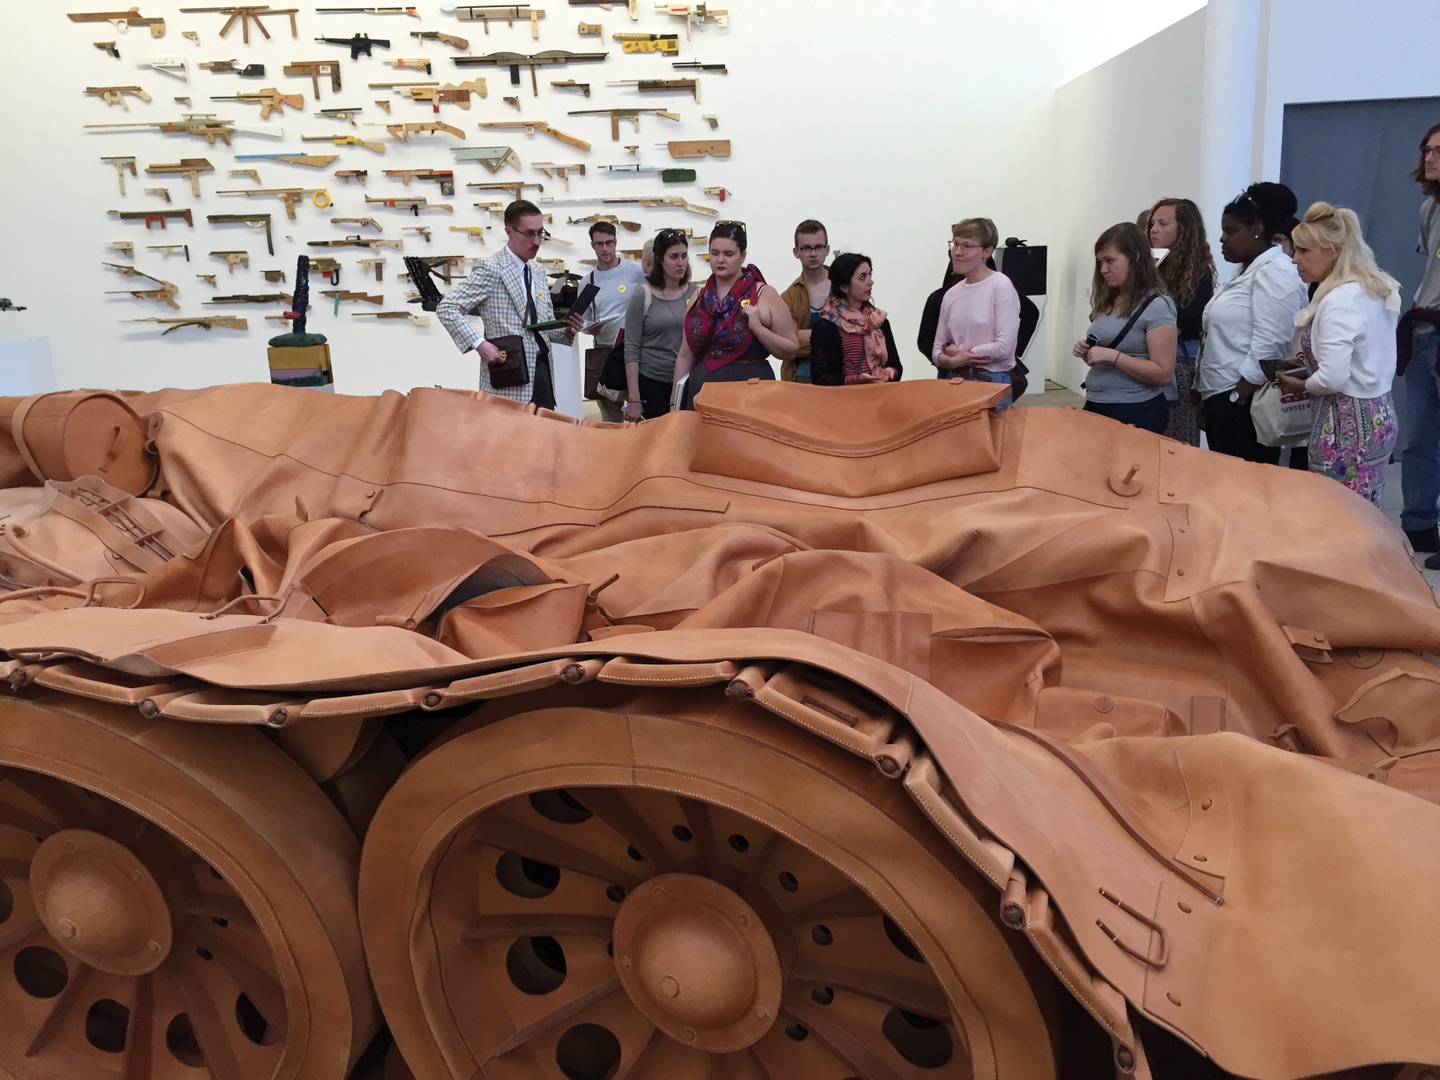 Sculpture of a military tank made of brownish-red leather; the wheels are prominent, but the top of the tank is deflated. Students are standing in the gallery looking at the tank; a multi-piece artwork installation is on the wall behind them.